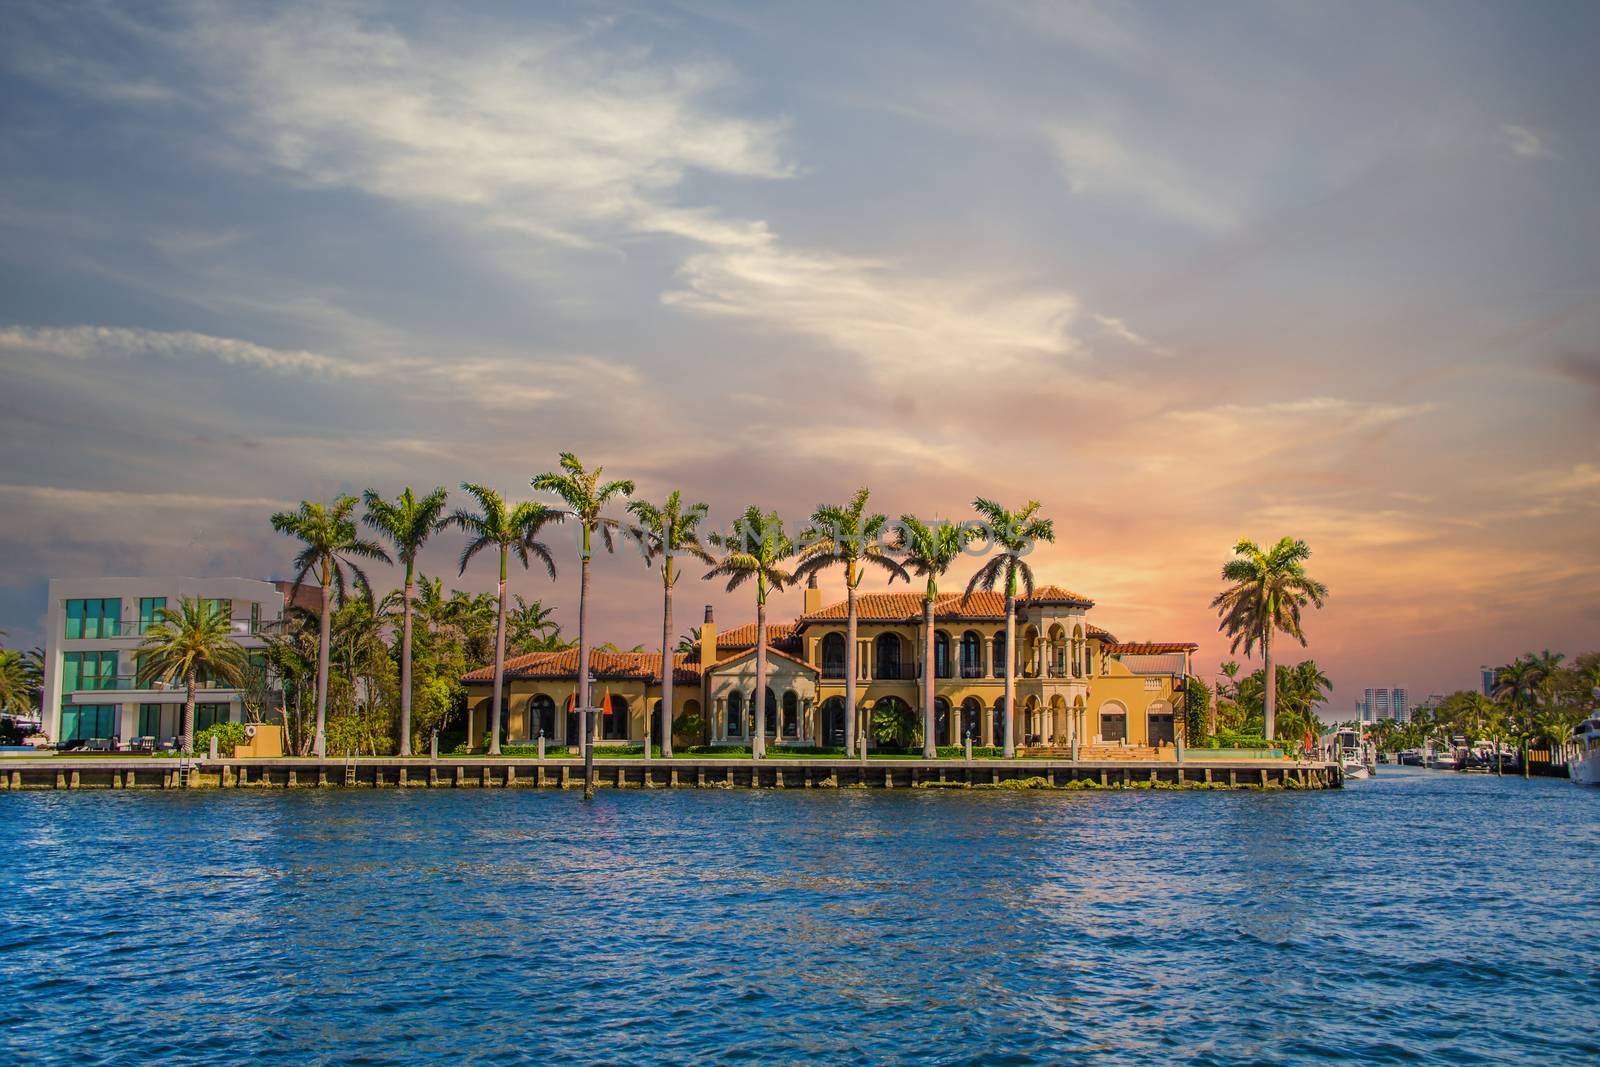 Large House in Fort Lauderdale at Sunset by dbvirago